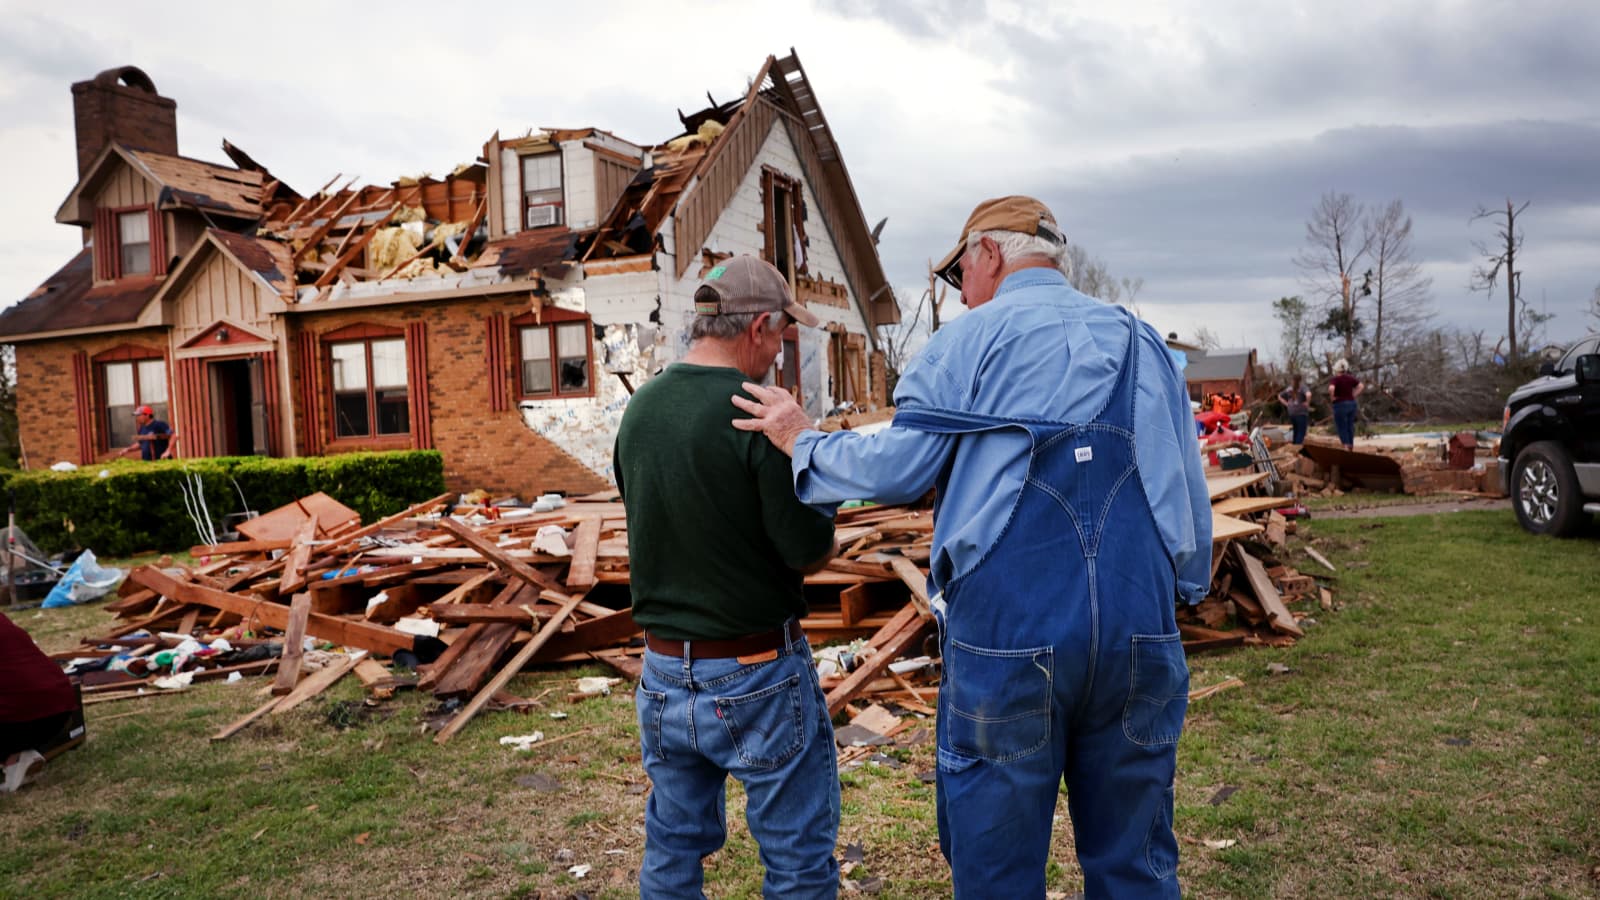 One man consoling other after the house destroyed due to tornado